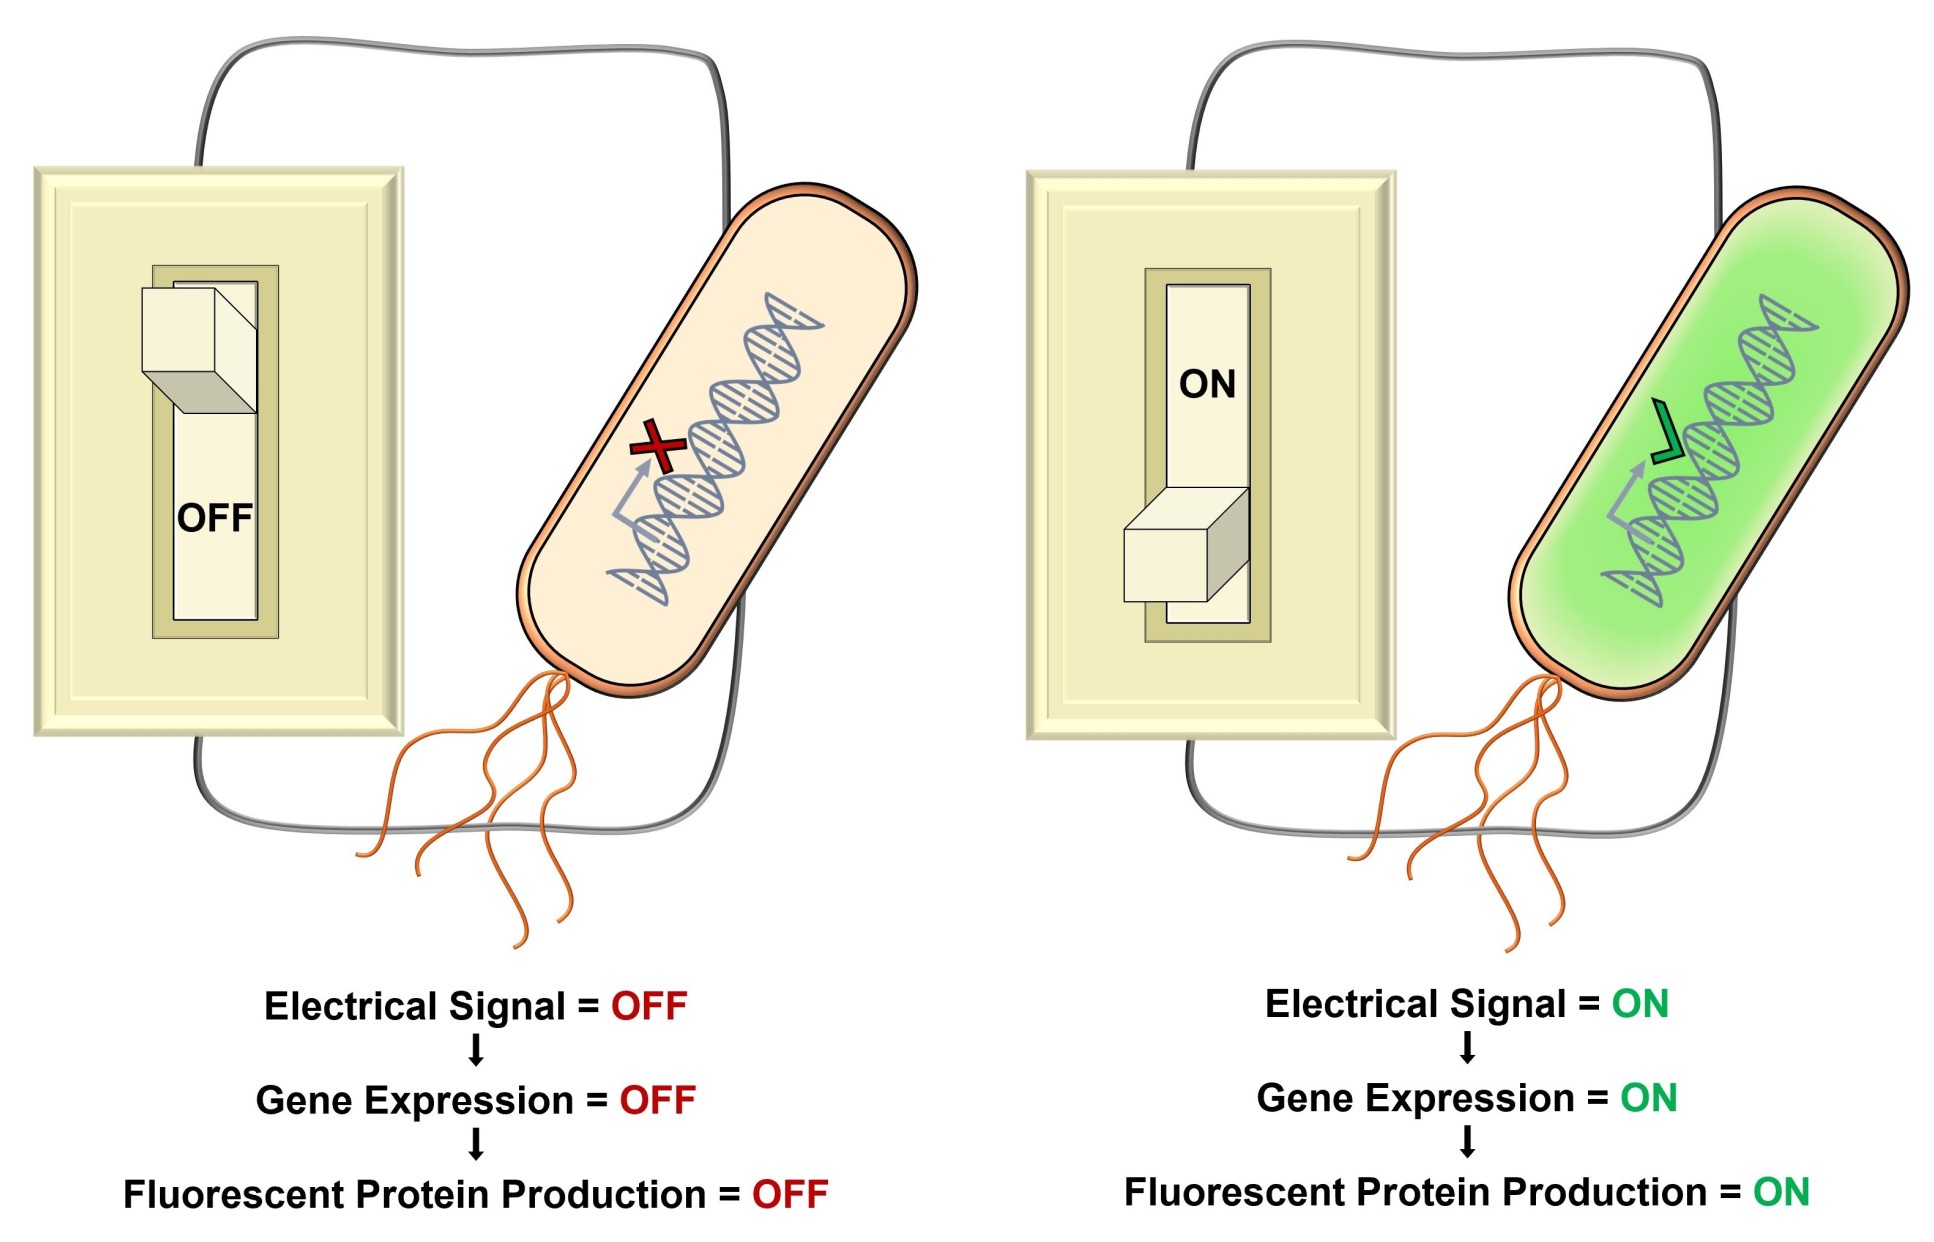 Illustration of a light switch and a bacteria with its DNA showing. On the left, the switch is off, so the DNA has a cross next to it and the bacteria is beige. On the right, the switch is on and the bacteria is coloured green